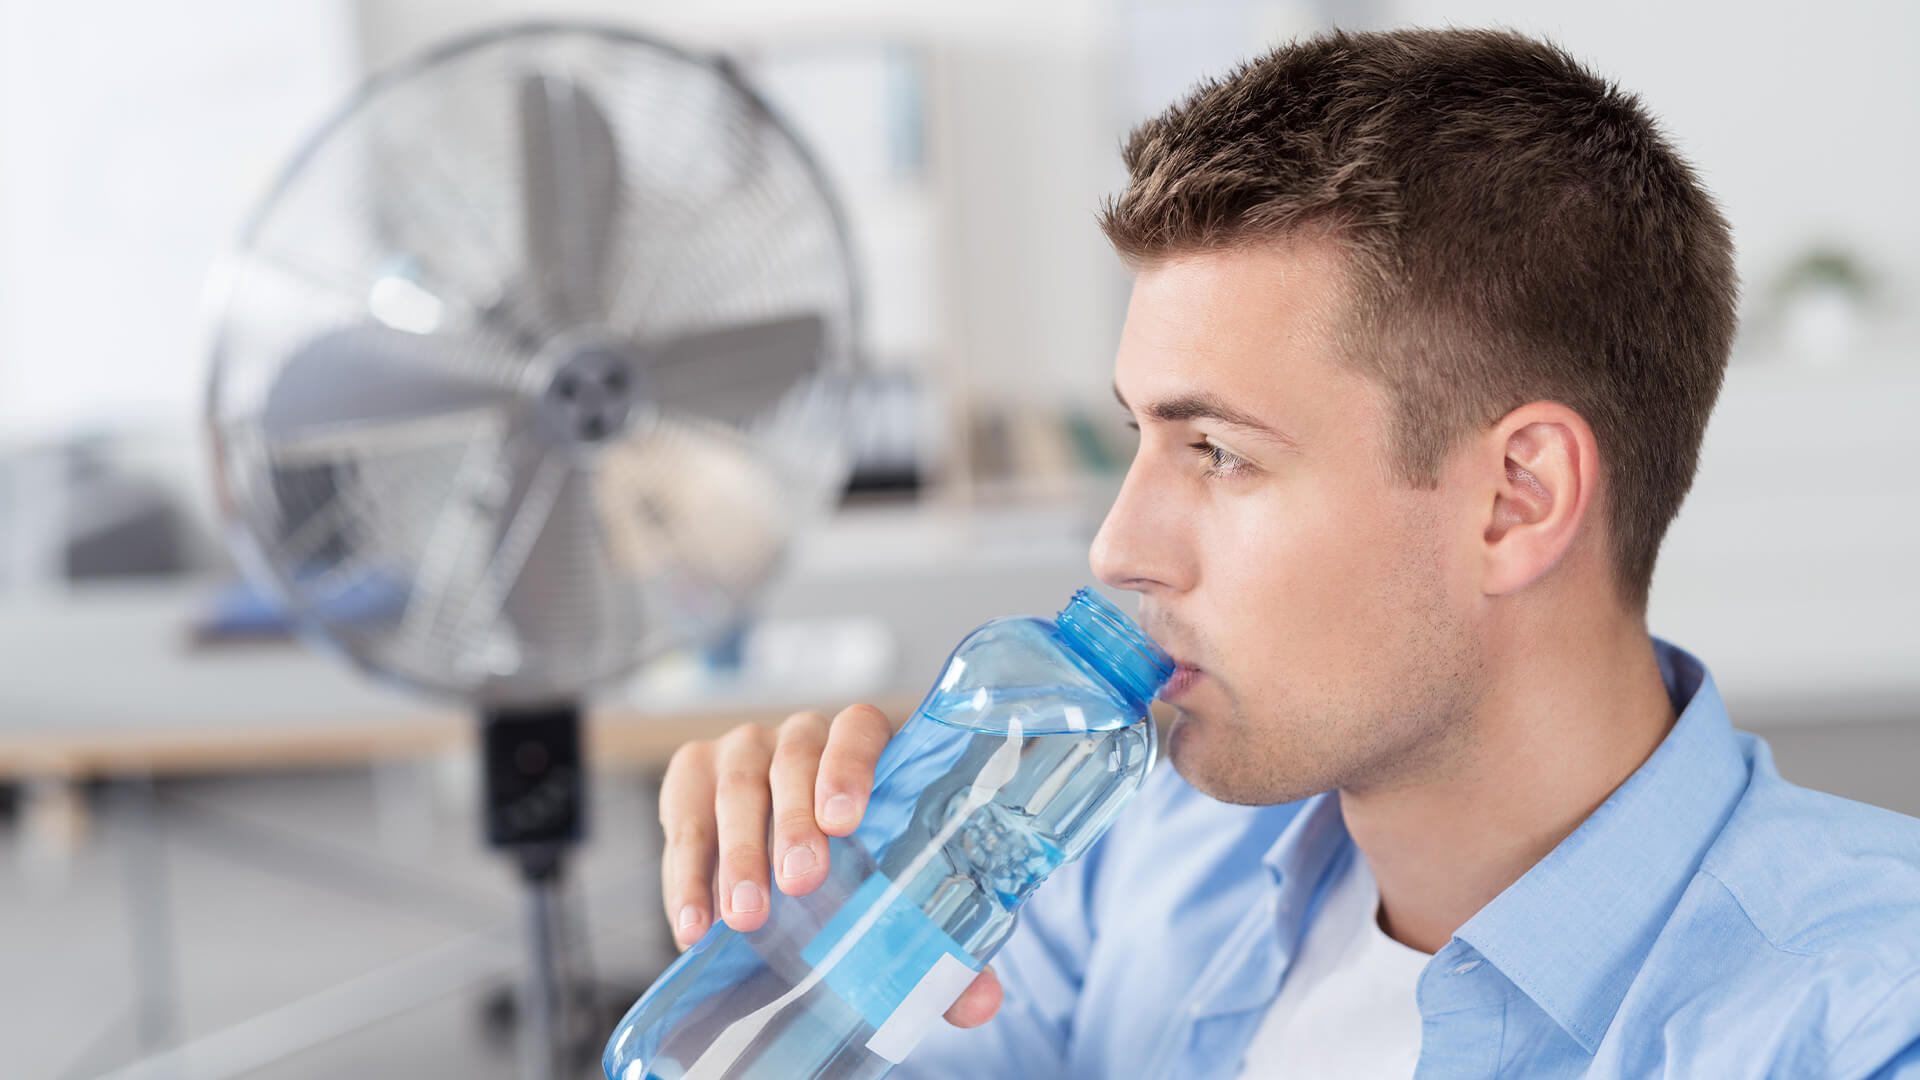 Management Expert Share Tips to Keep Your Team Motivated During a Heatwave